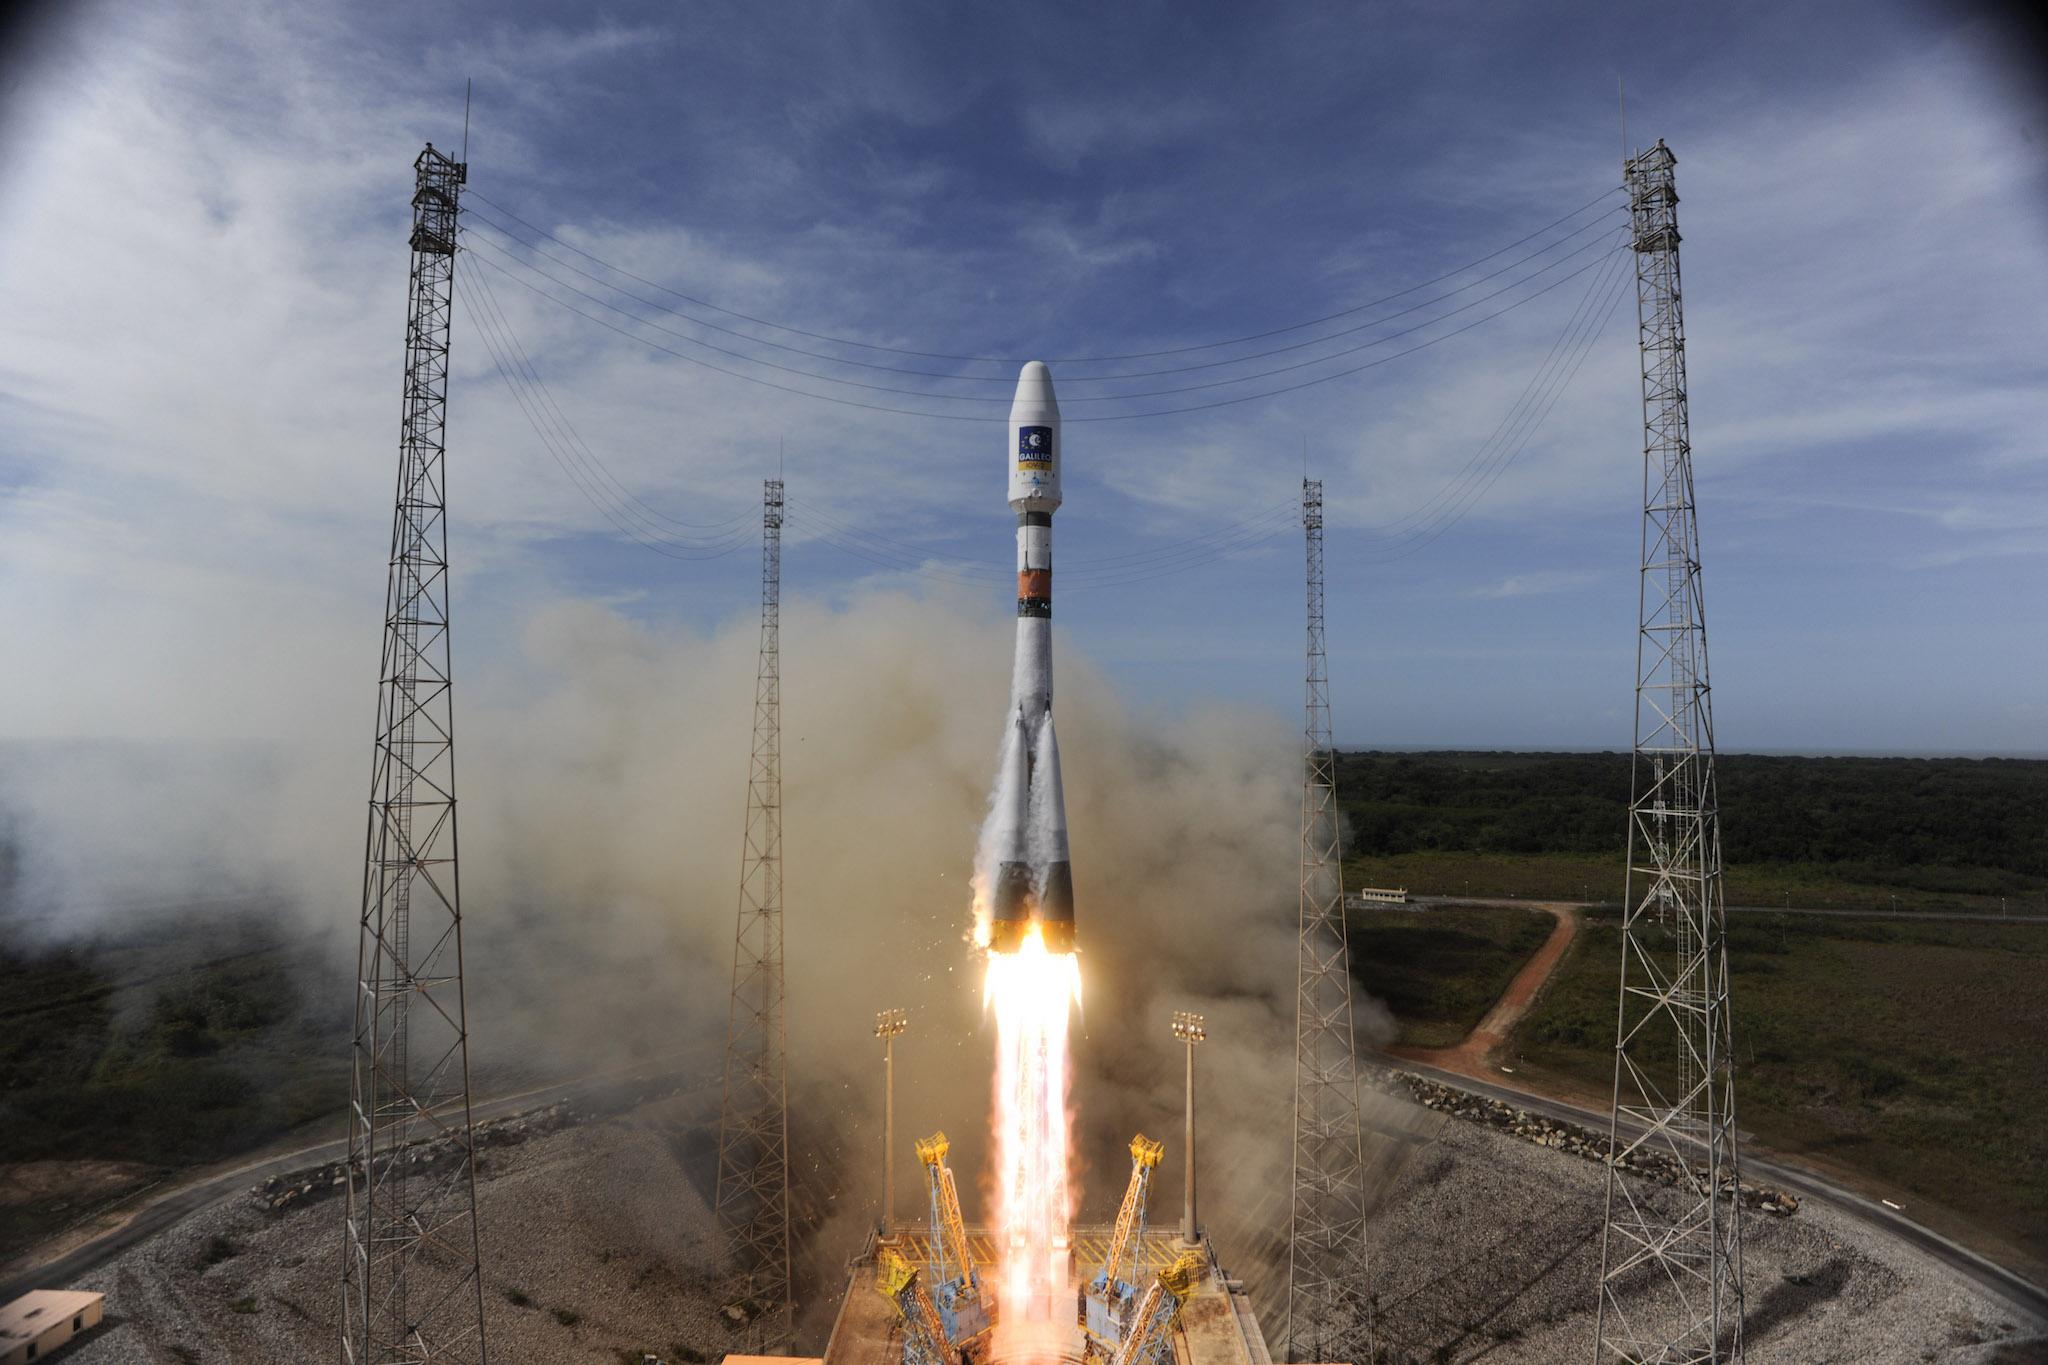 Rocket launches, such as this one at the European Space Agency in French Guiana, will be feature of the A’Mhoine peninsula